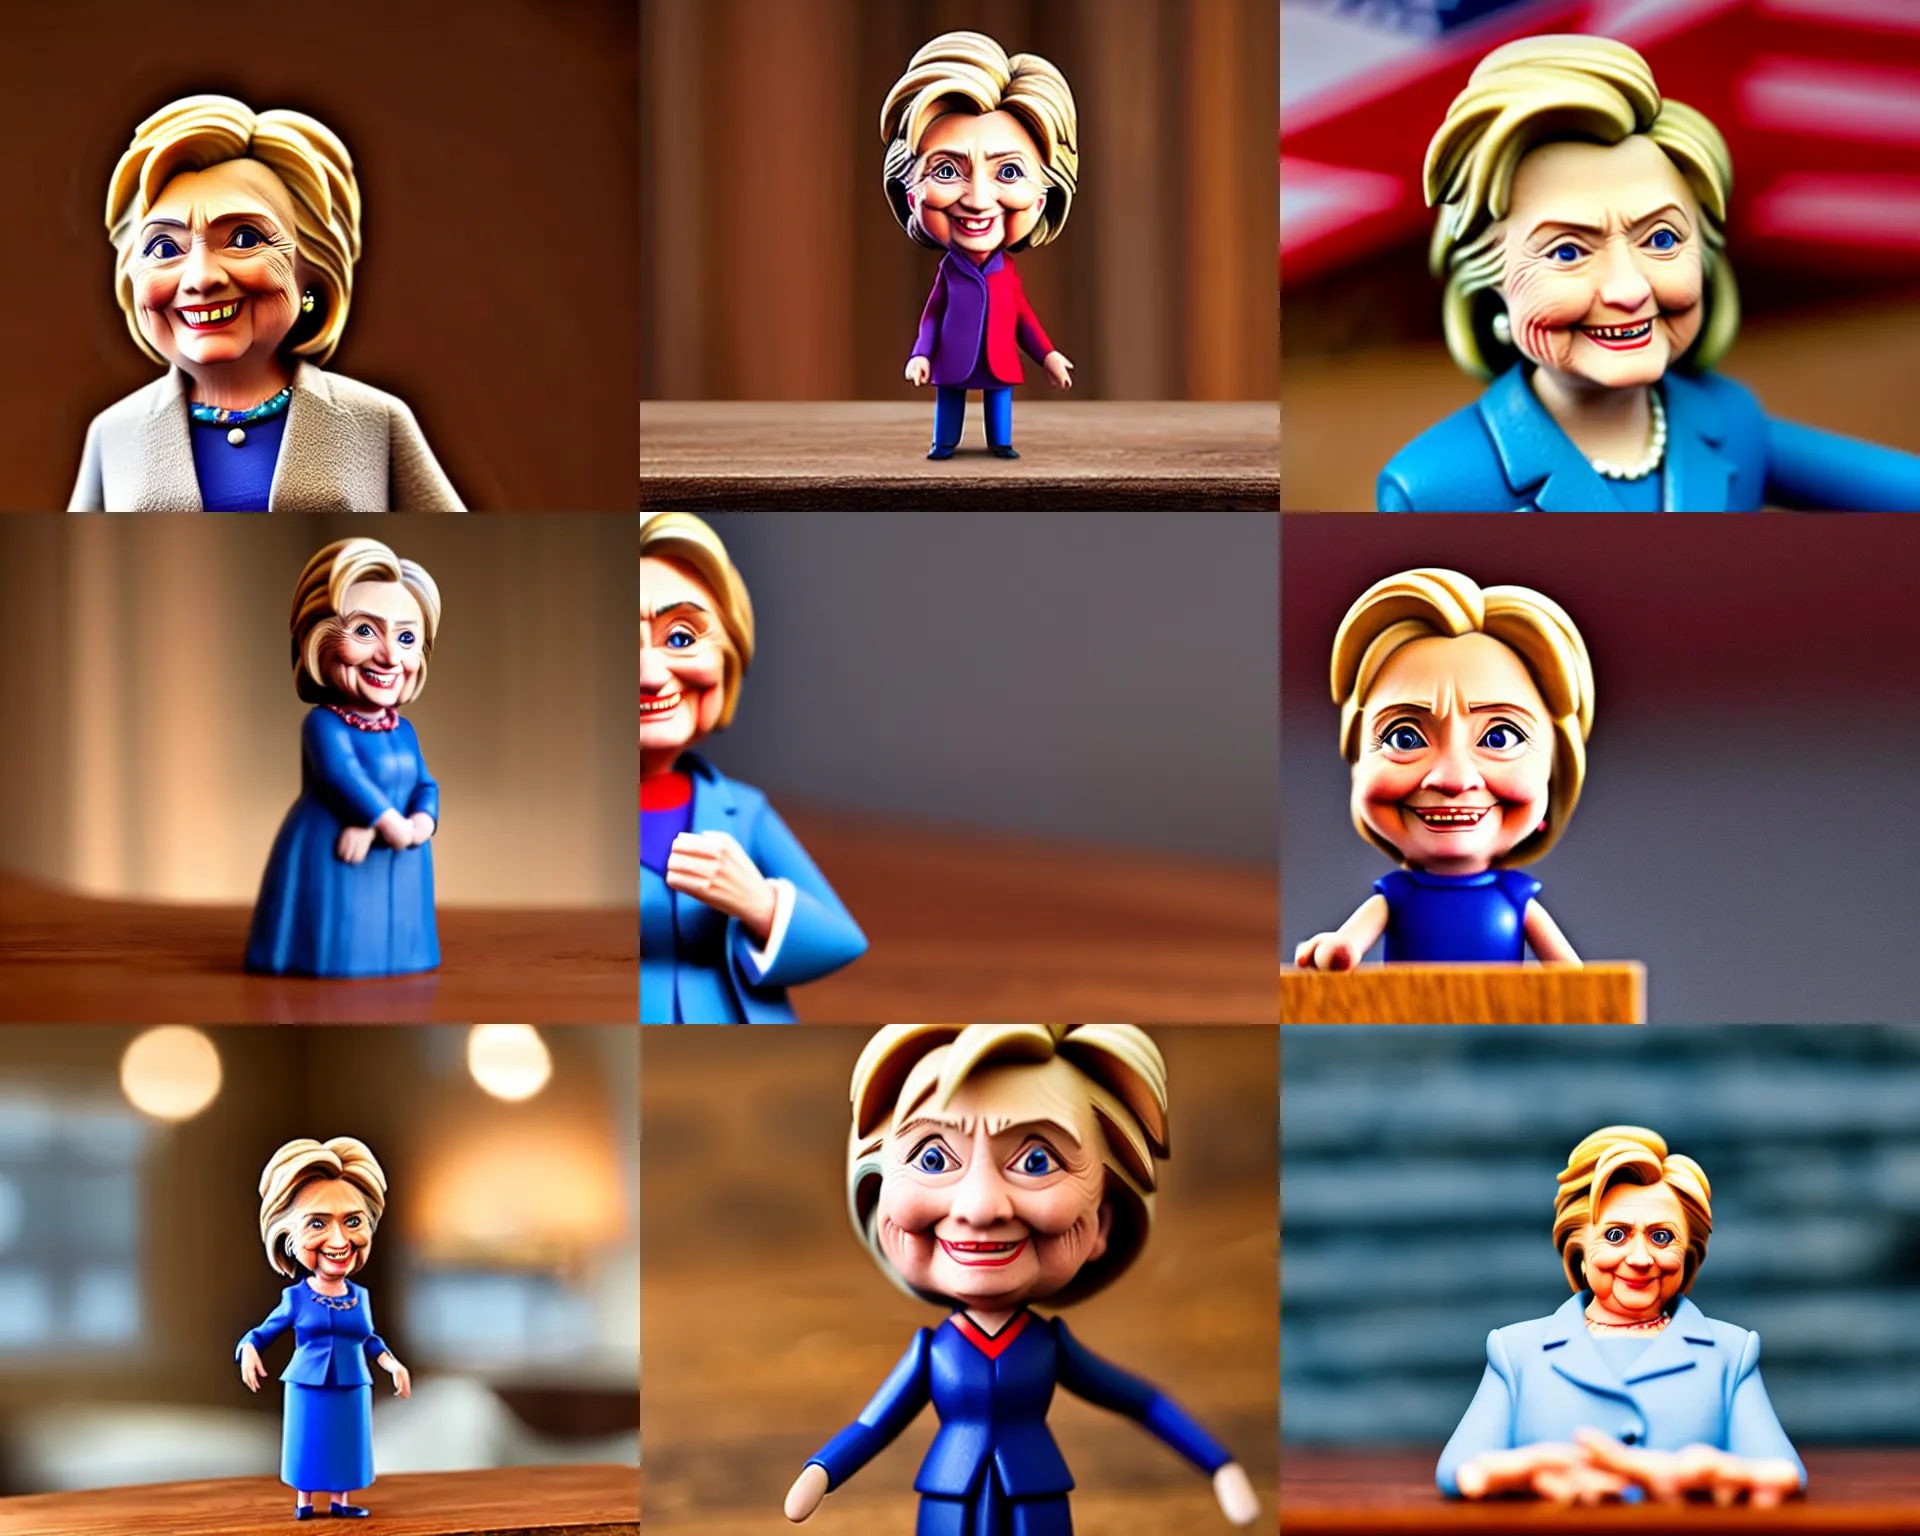 Prompt: hillary clinton figurine by pixar sad bokeh on wooden table.